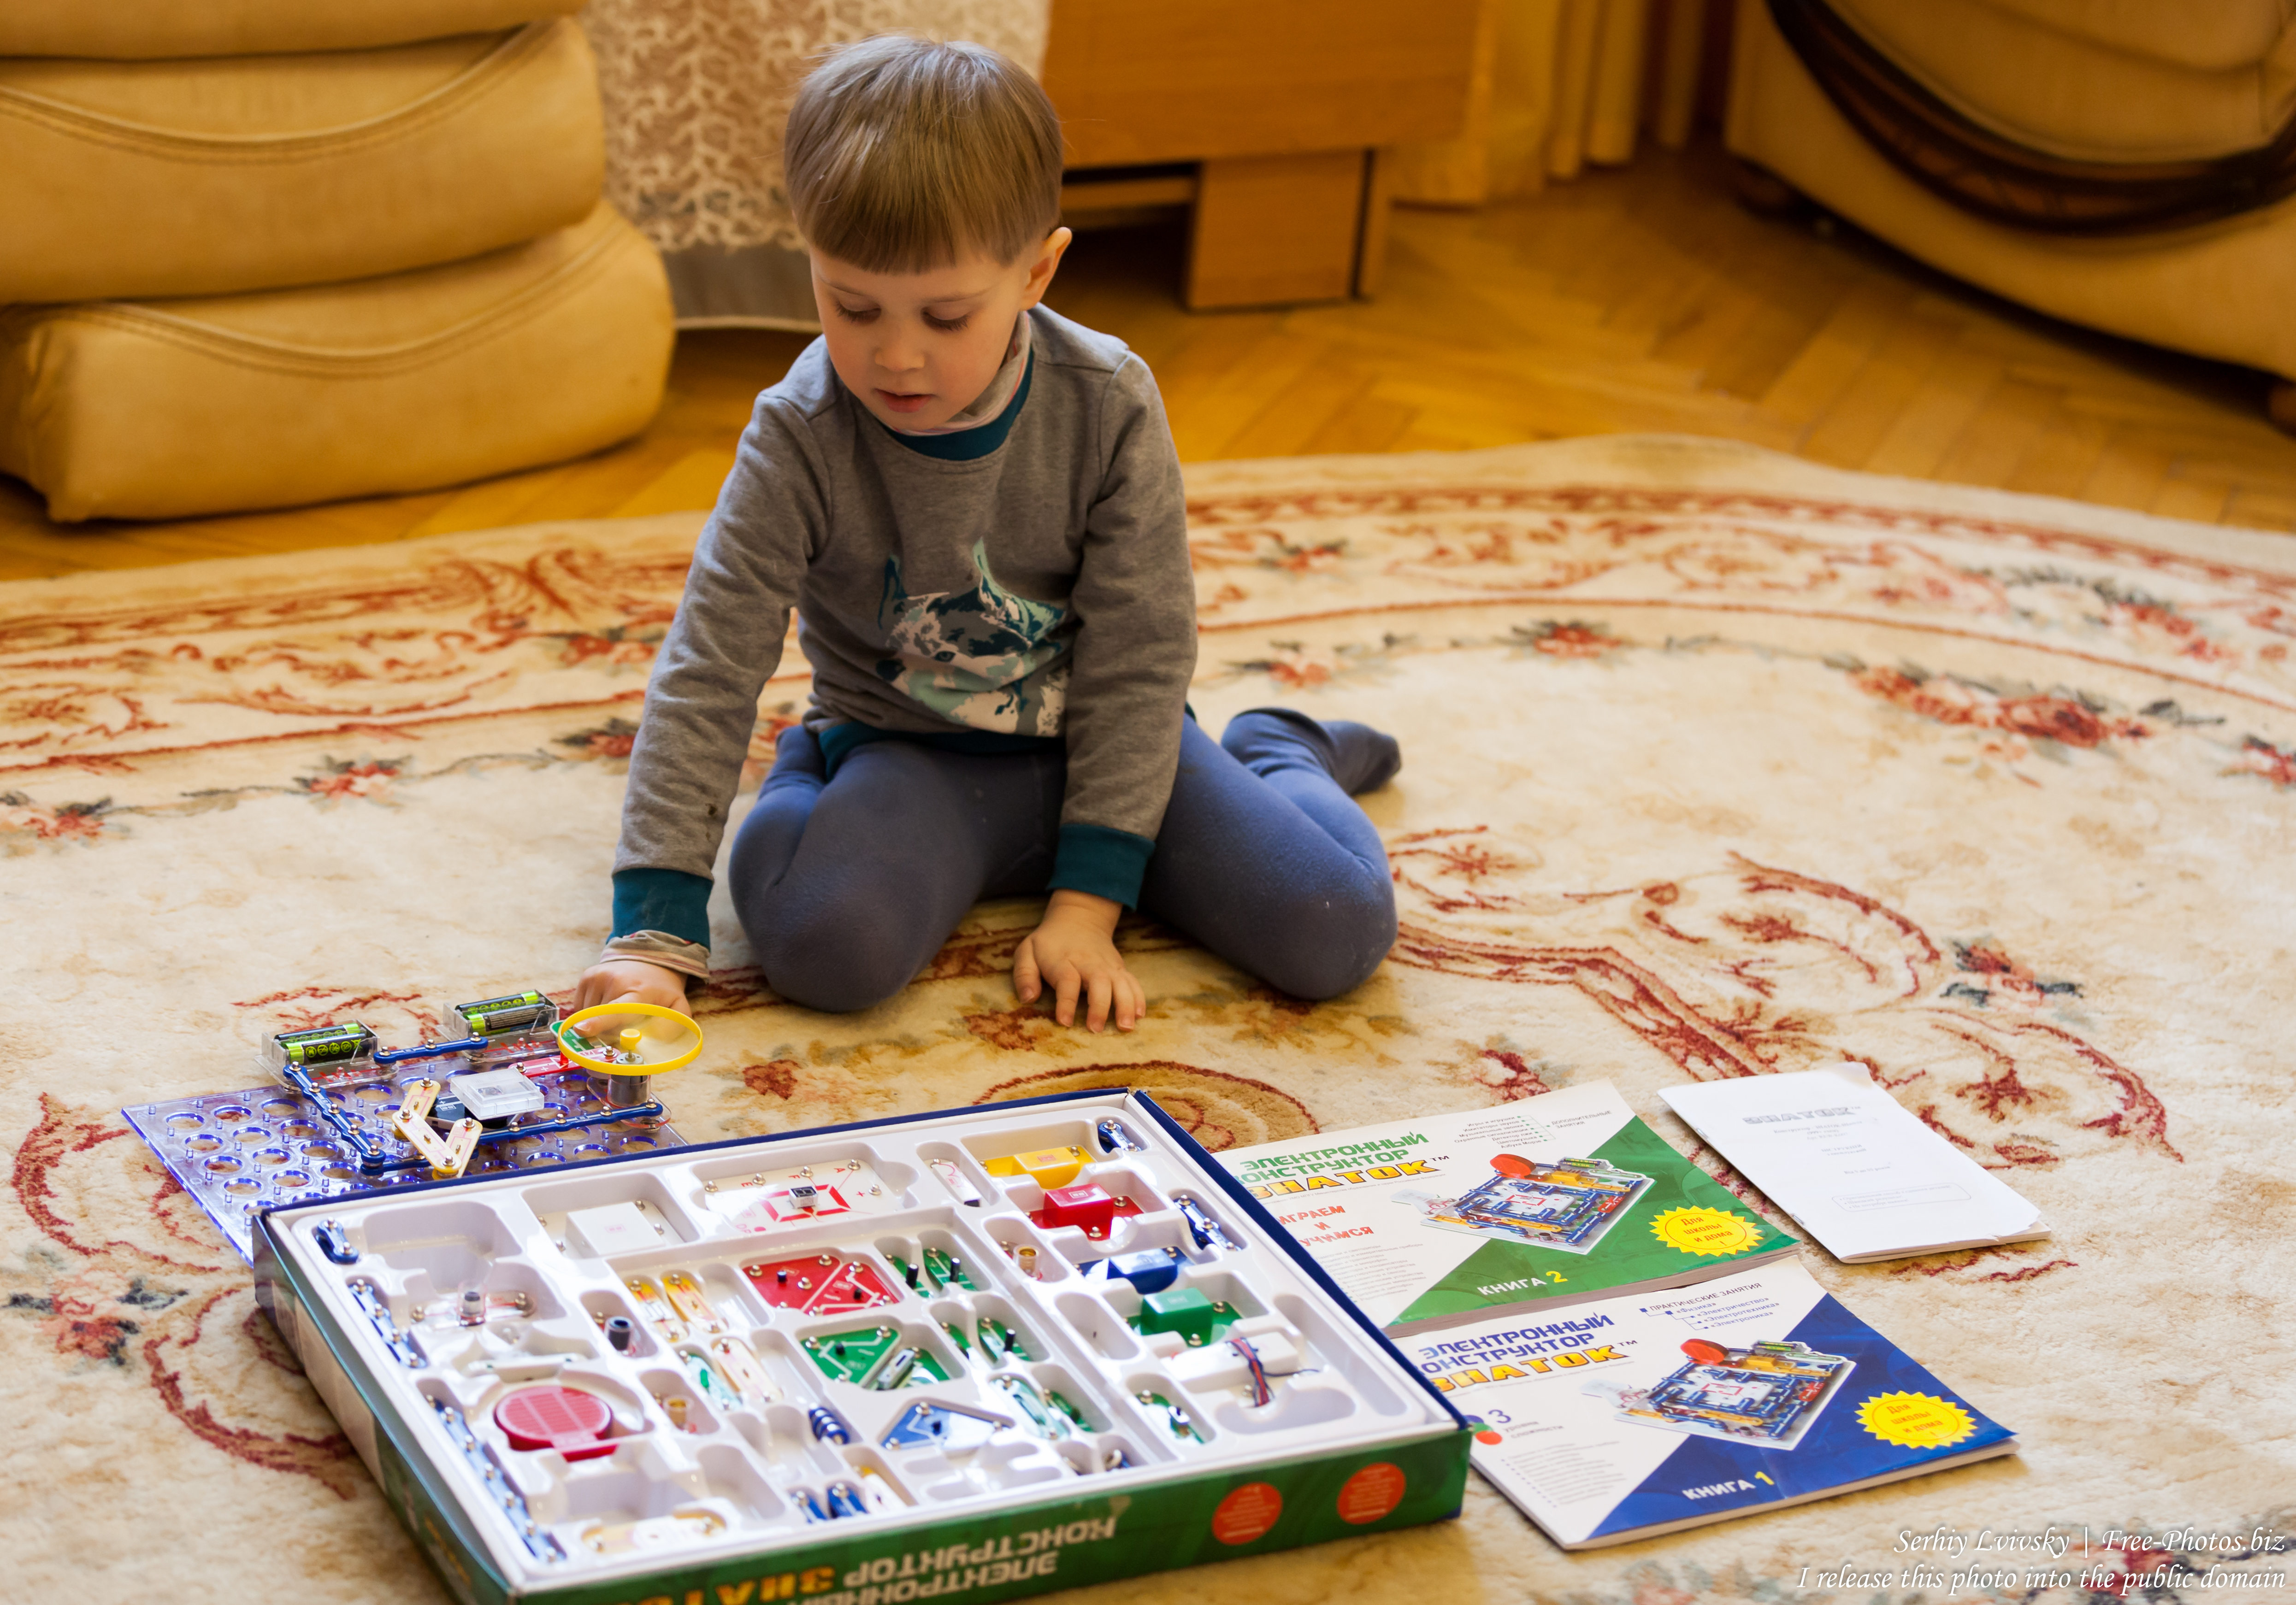 a 4-year-old boy playing in February 2018 photographed by Serhiy Lvivsky